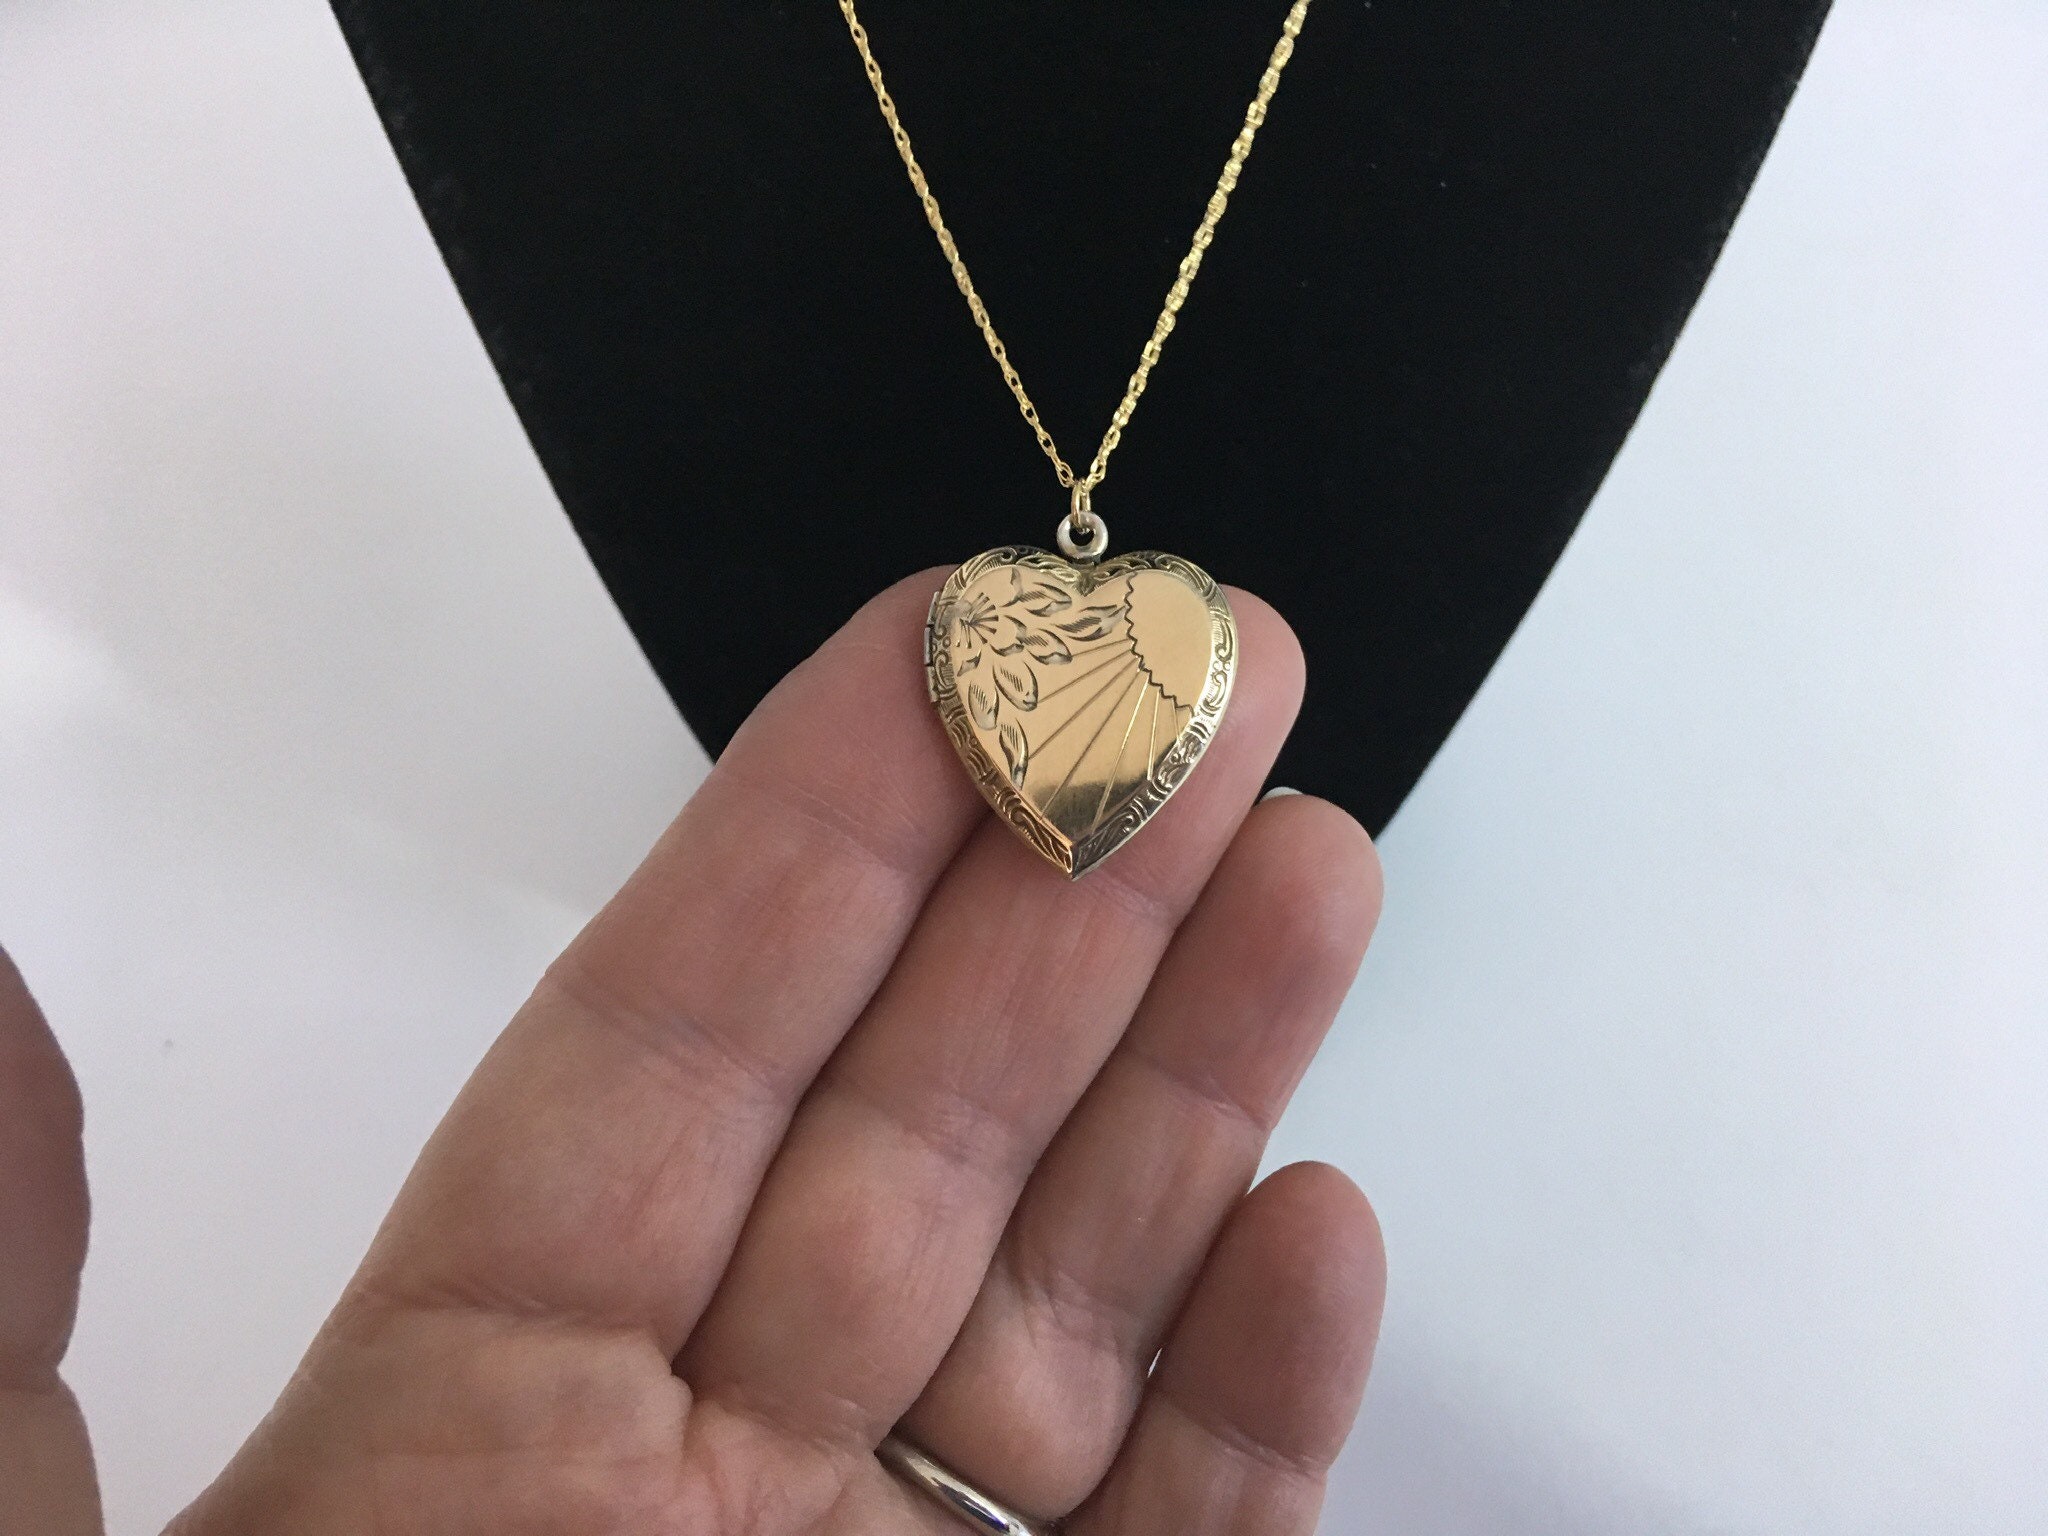 Vintage Vermiel Heart Locket Necklace w/ 14K Gold Fill Chain - Etched ...